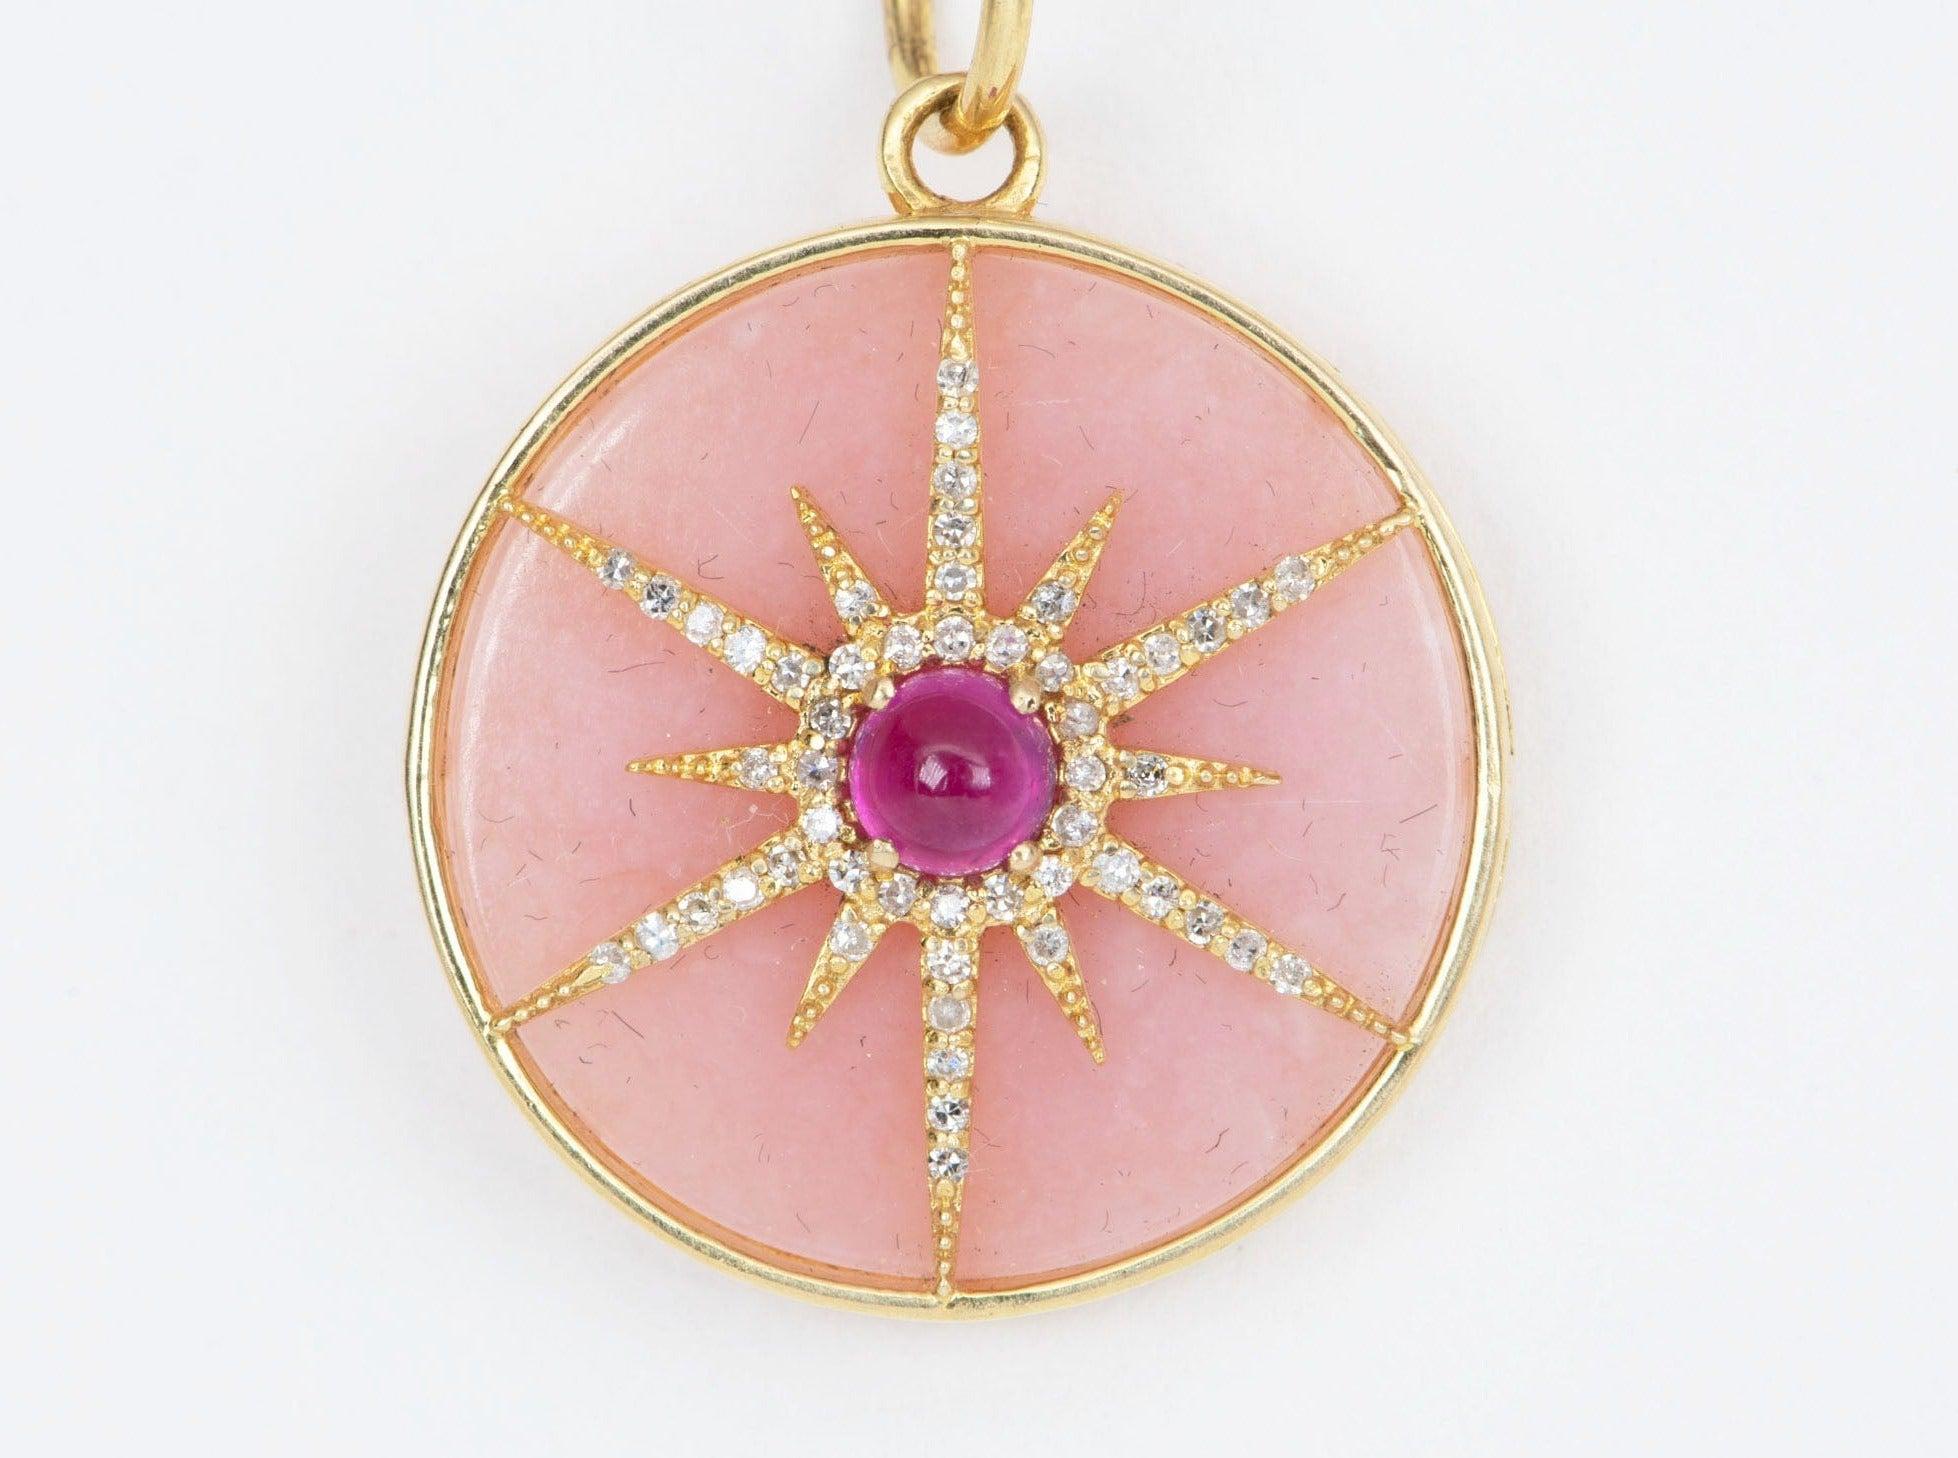 ♥  A beautiful diamond and ruby celestial star pendant with Peruvian pink Opal backing 
♥ The pendant measures 24.5 mm in length, 21.7 mm in width, and is 6.2 mm thick

♥ Gemstone: Pink Opal, Diamond 0.16ct
♥ All stone(s) used are genuine,